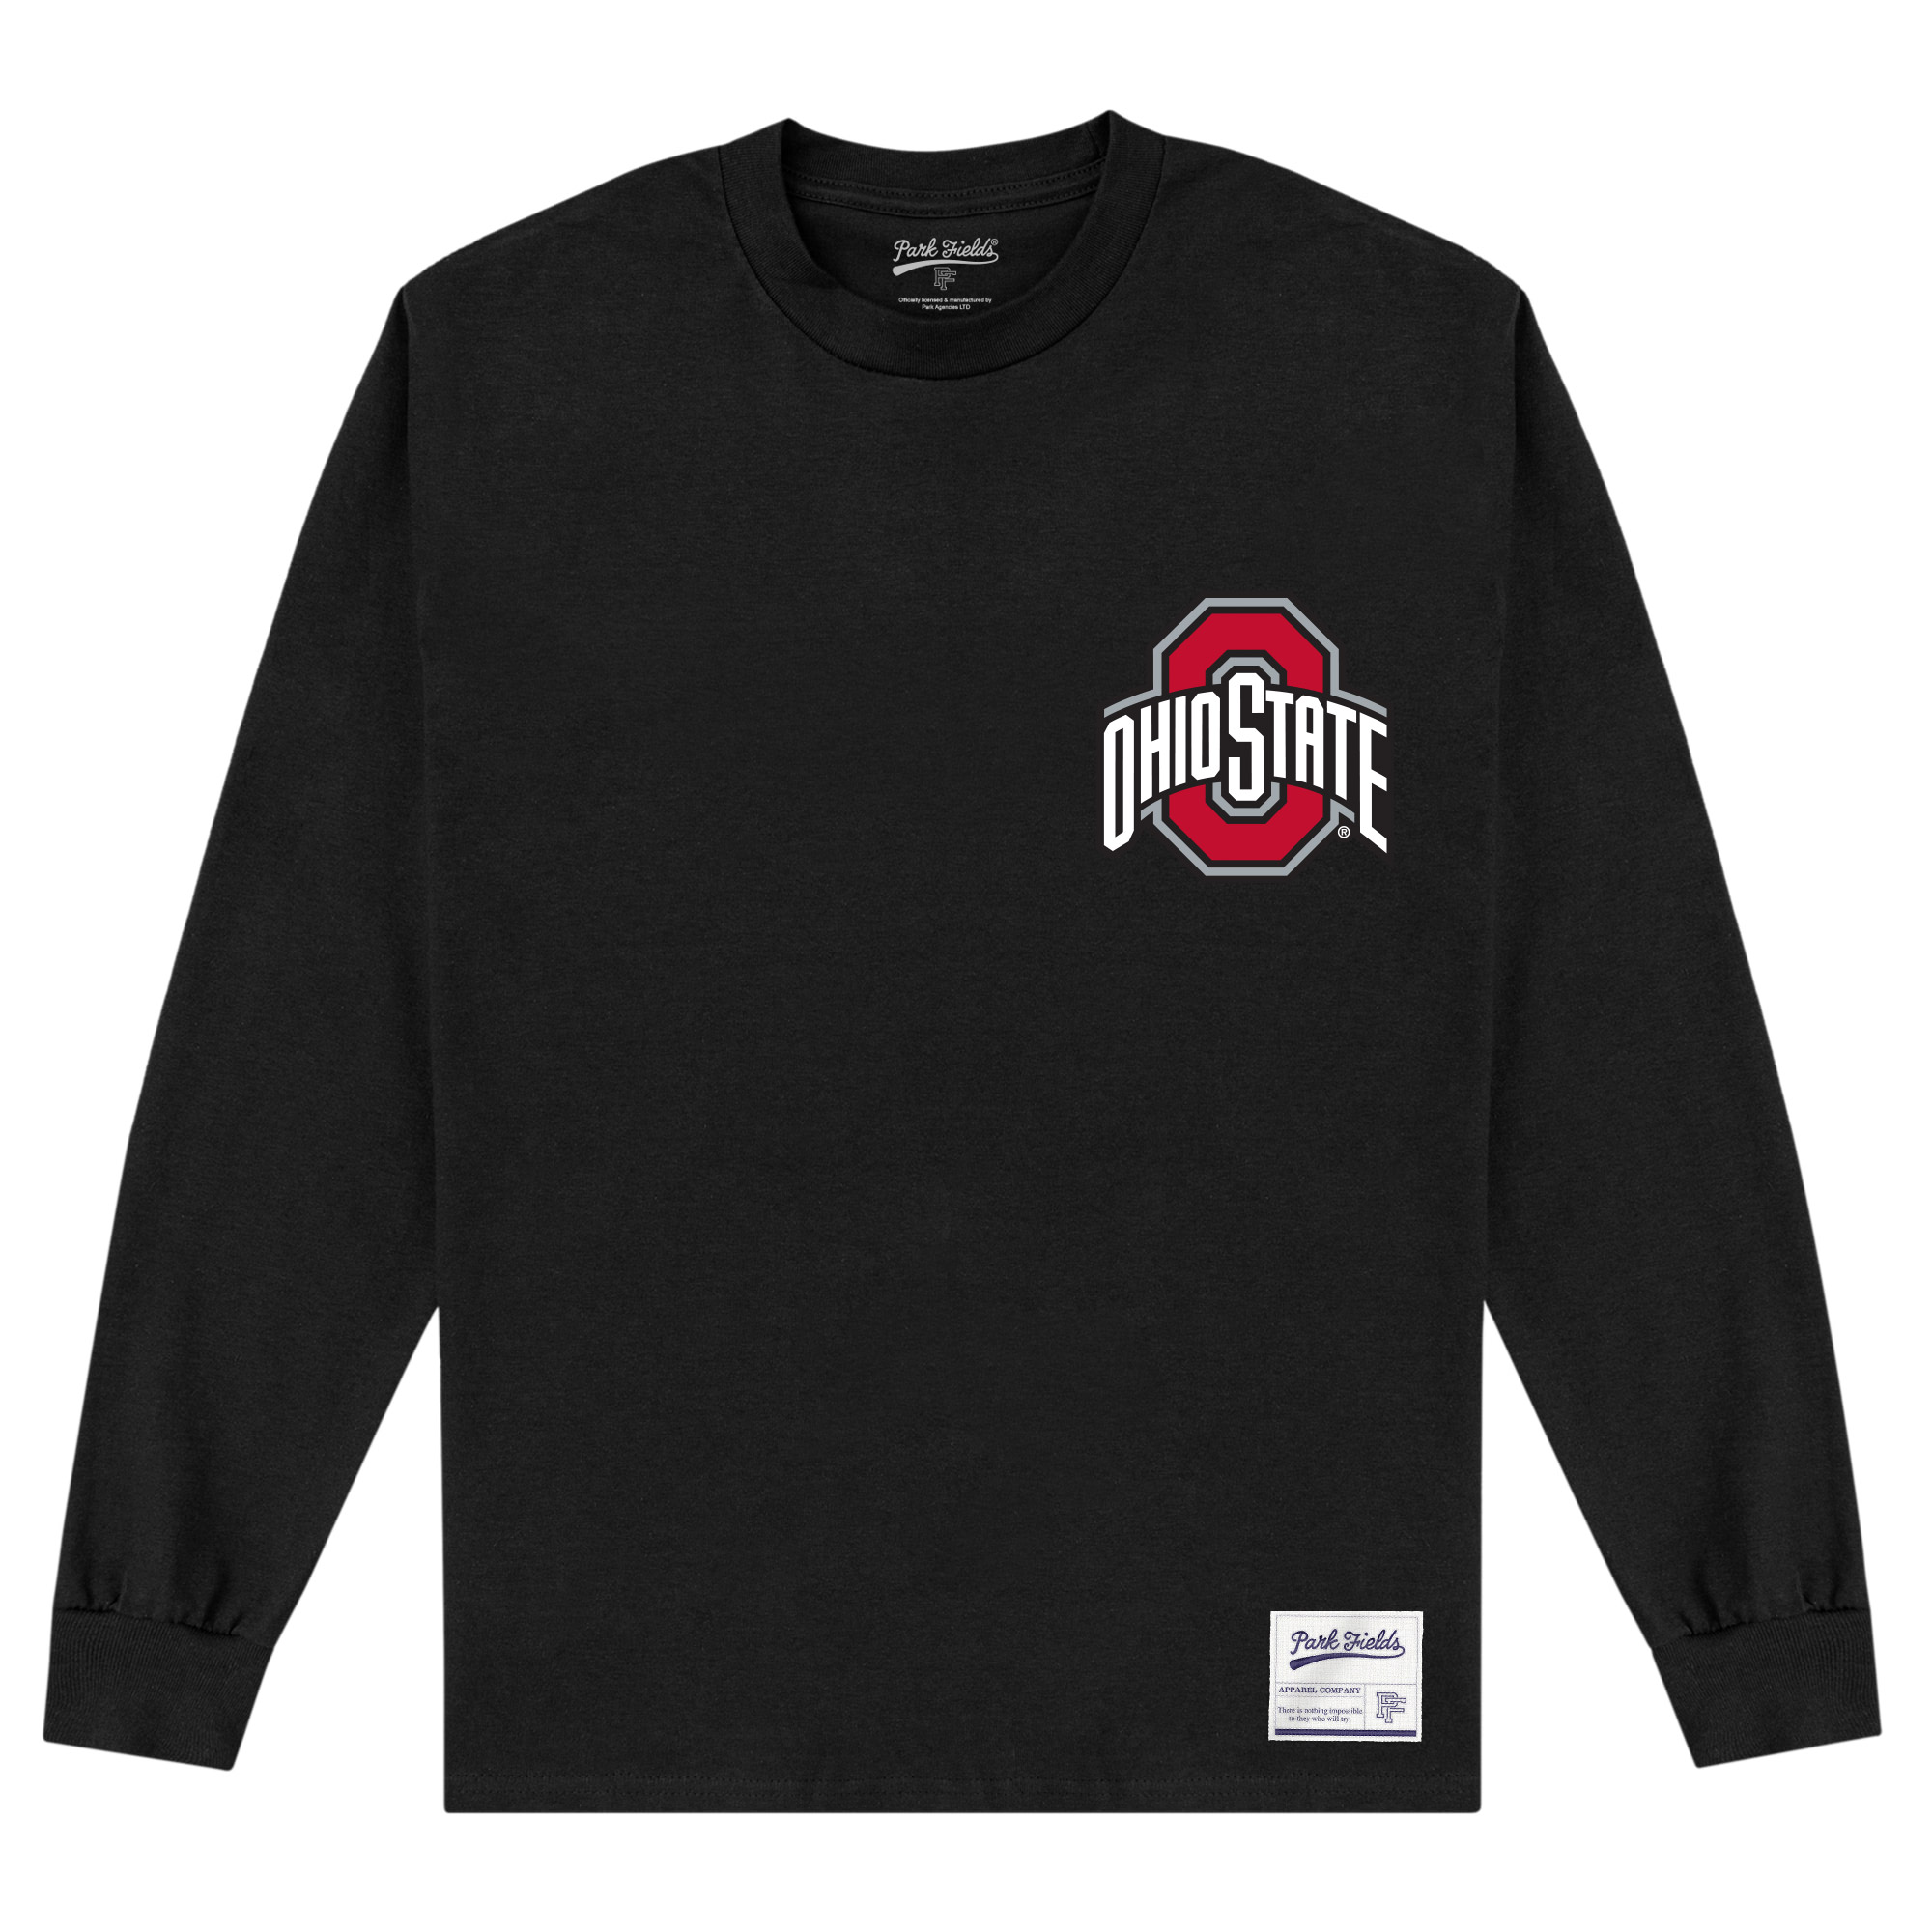 Official Ohio State University T-Shirt Black Long Sleeve Print Crew Neck Tee Top